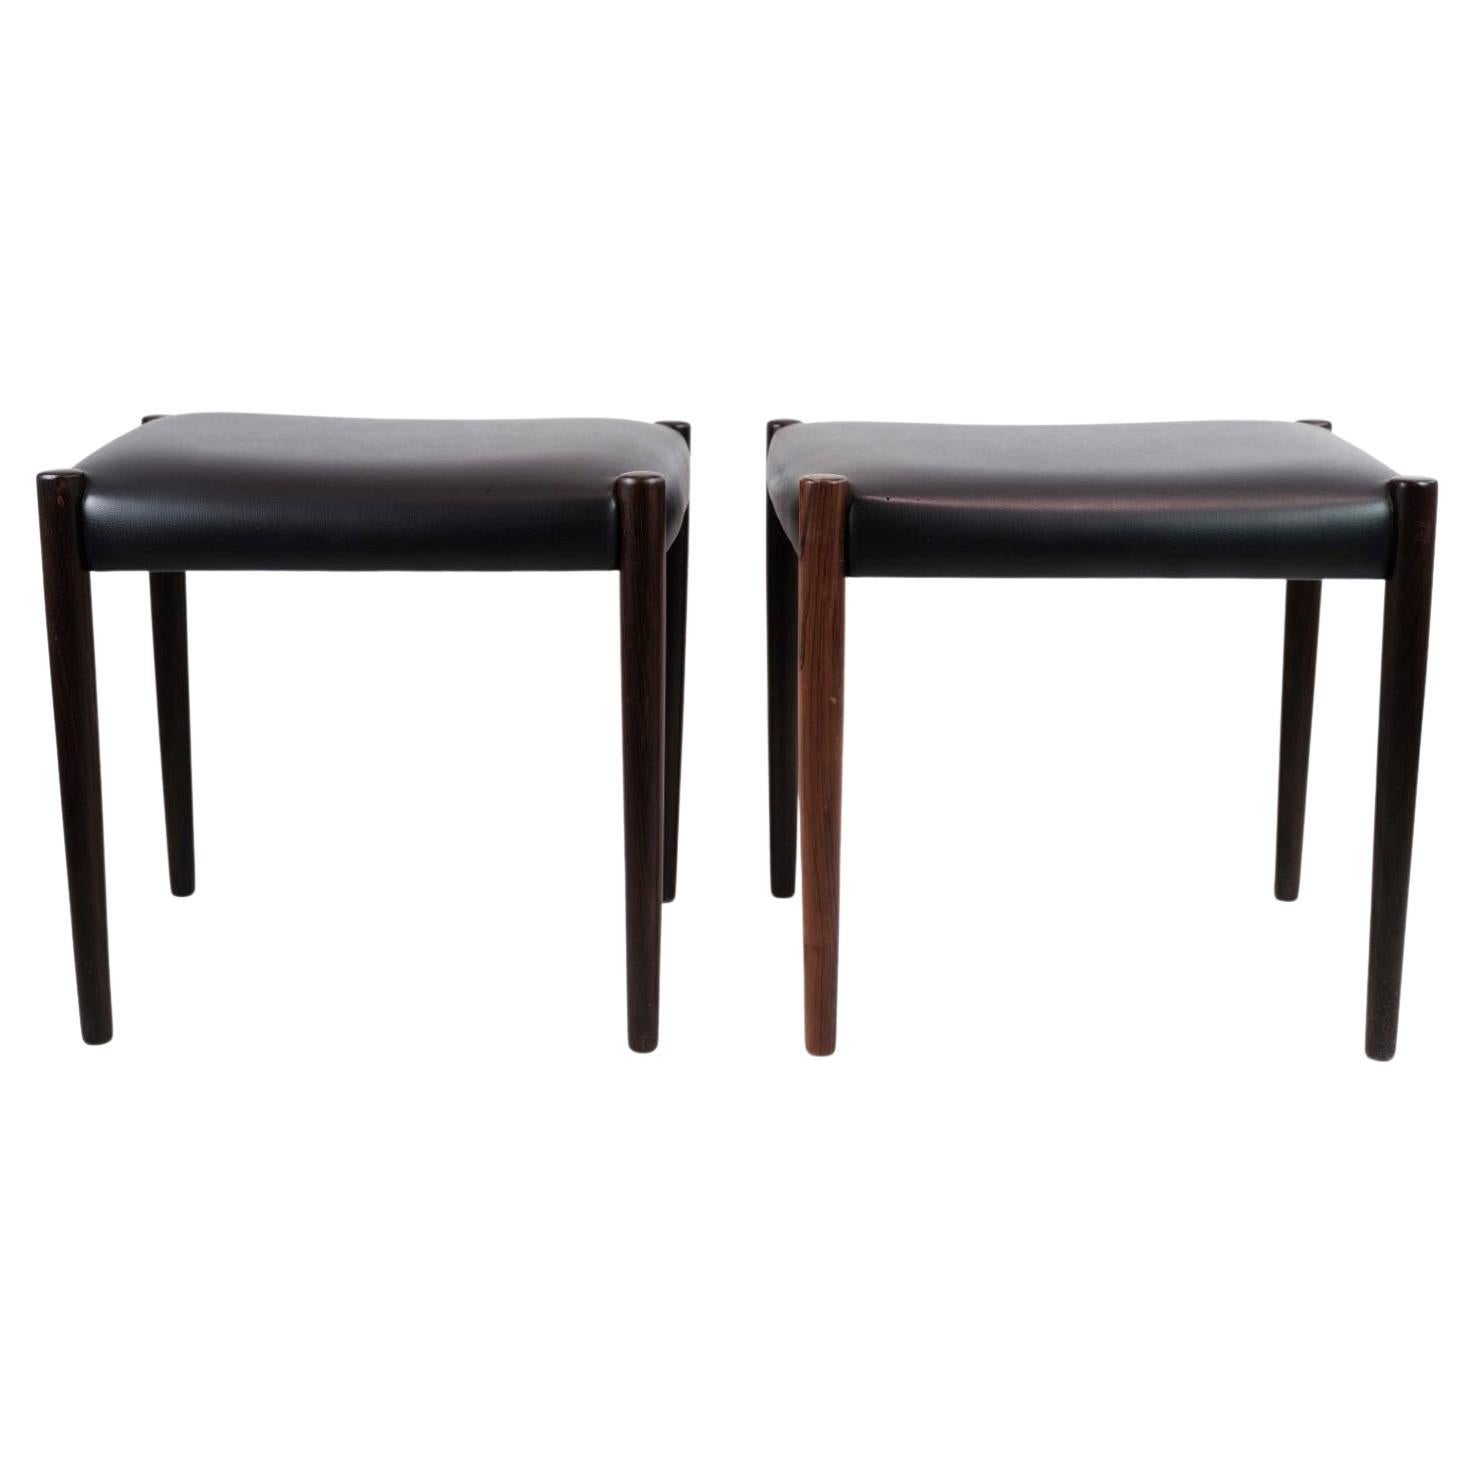 Set Of 2 Stools Made In Rosewood & Black Leather Seat From 1960s